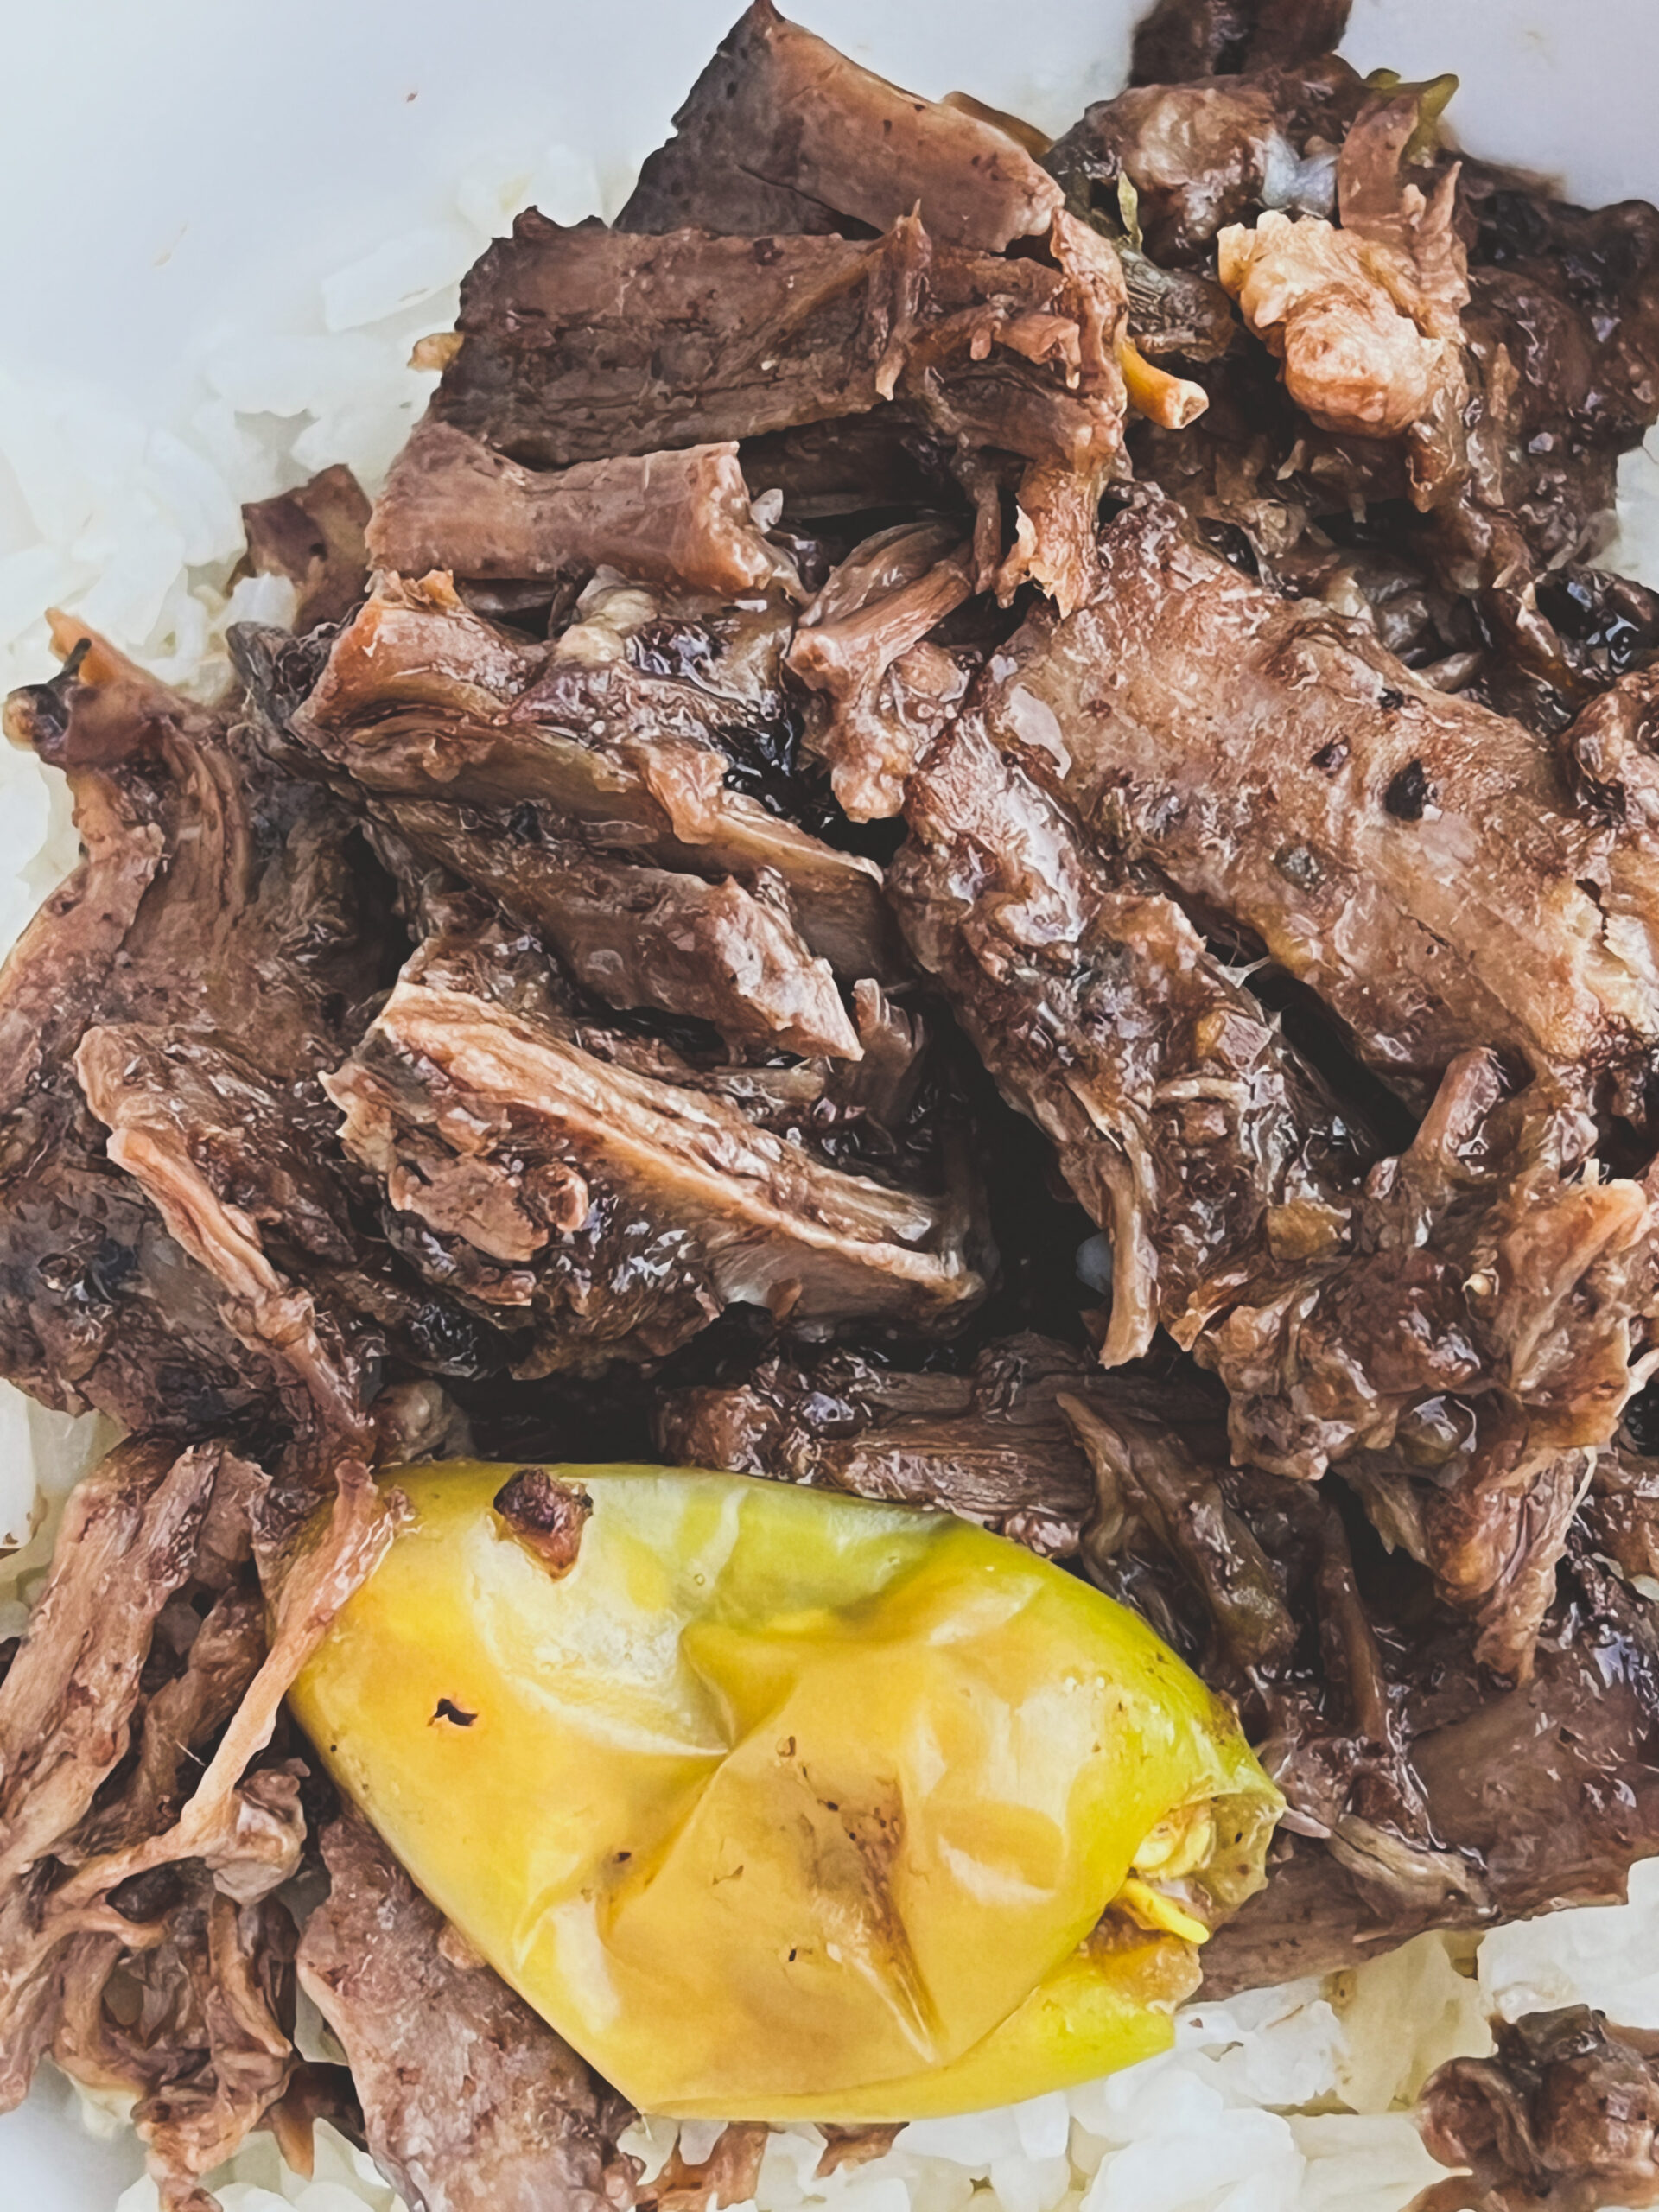 Mississippi Pot Roast without Packaged Spice Mixes